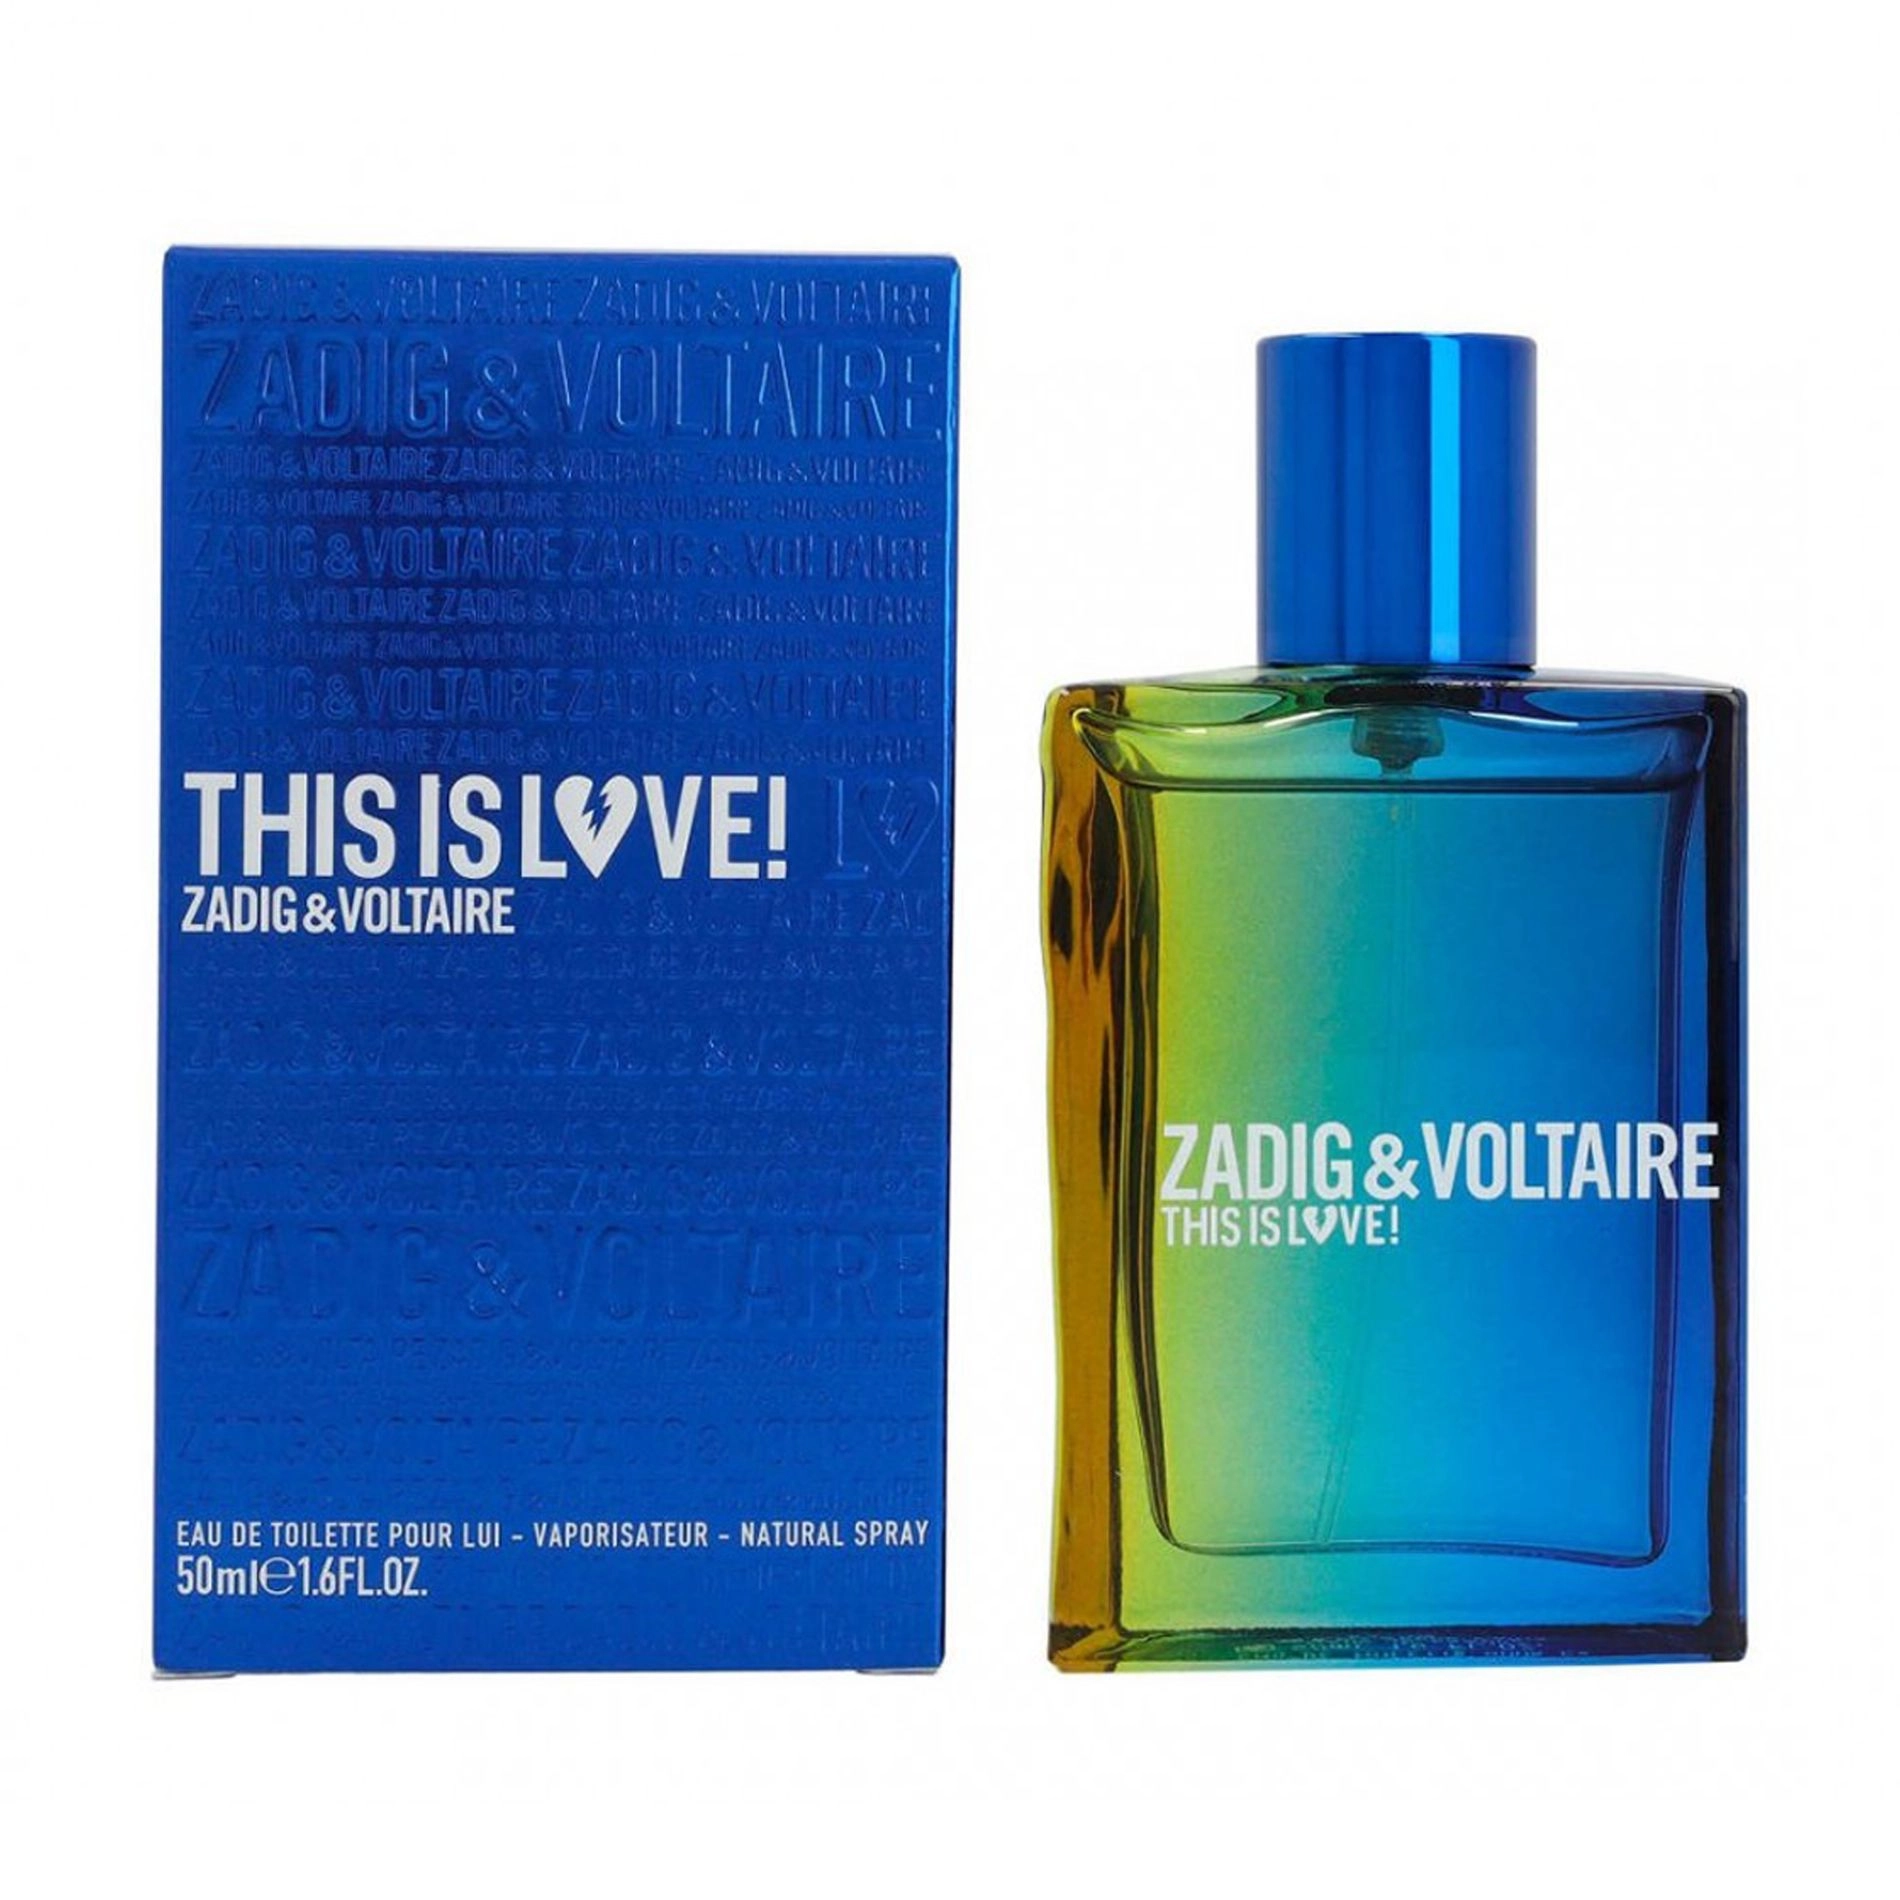 Zadig & Voltaire This is Love! for Him Туалетная вода мужская, 50 мл - фото N1